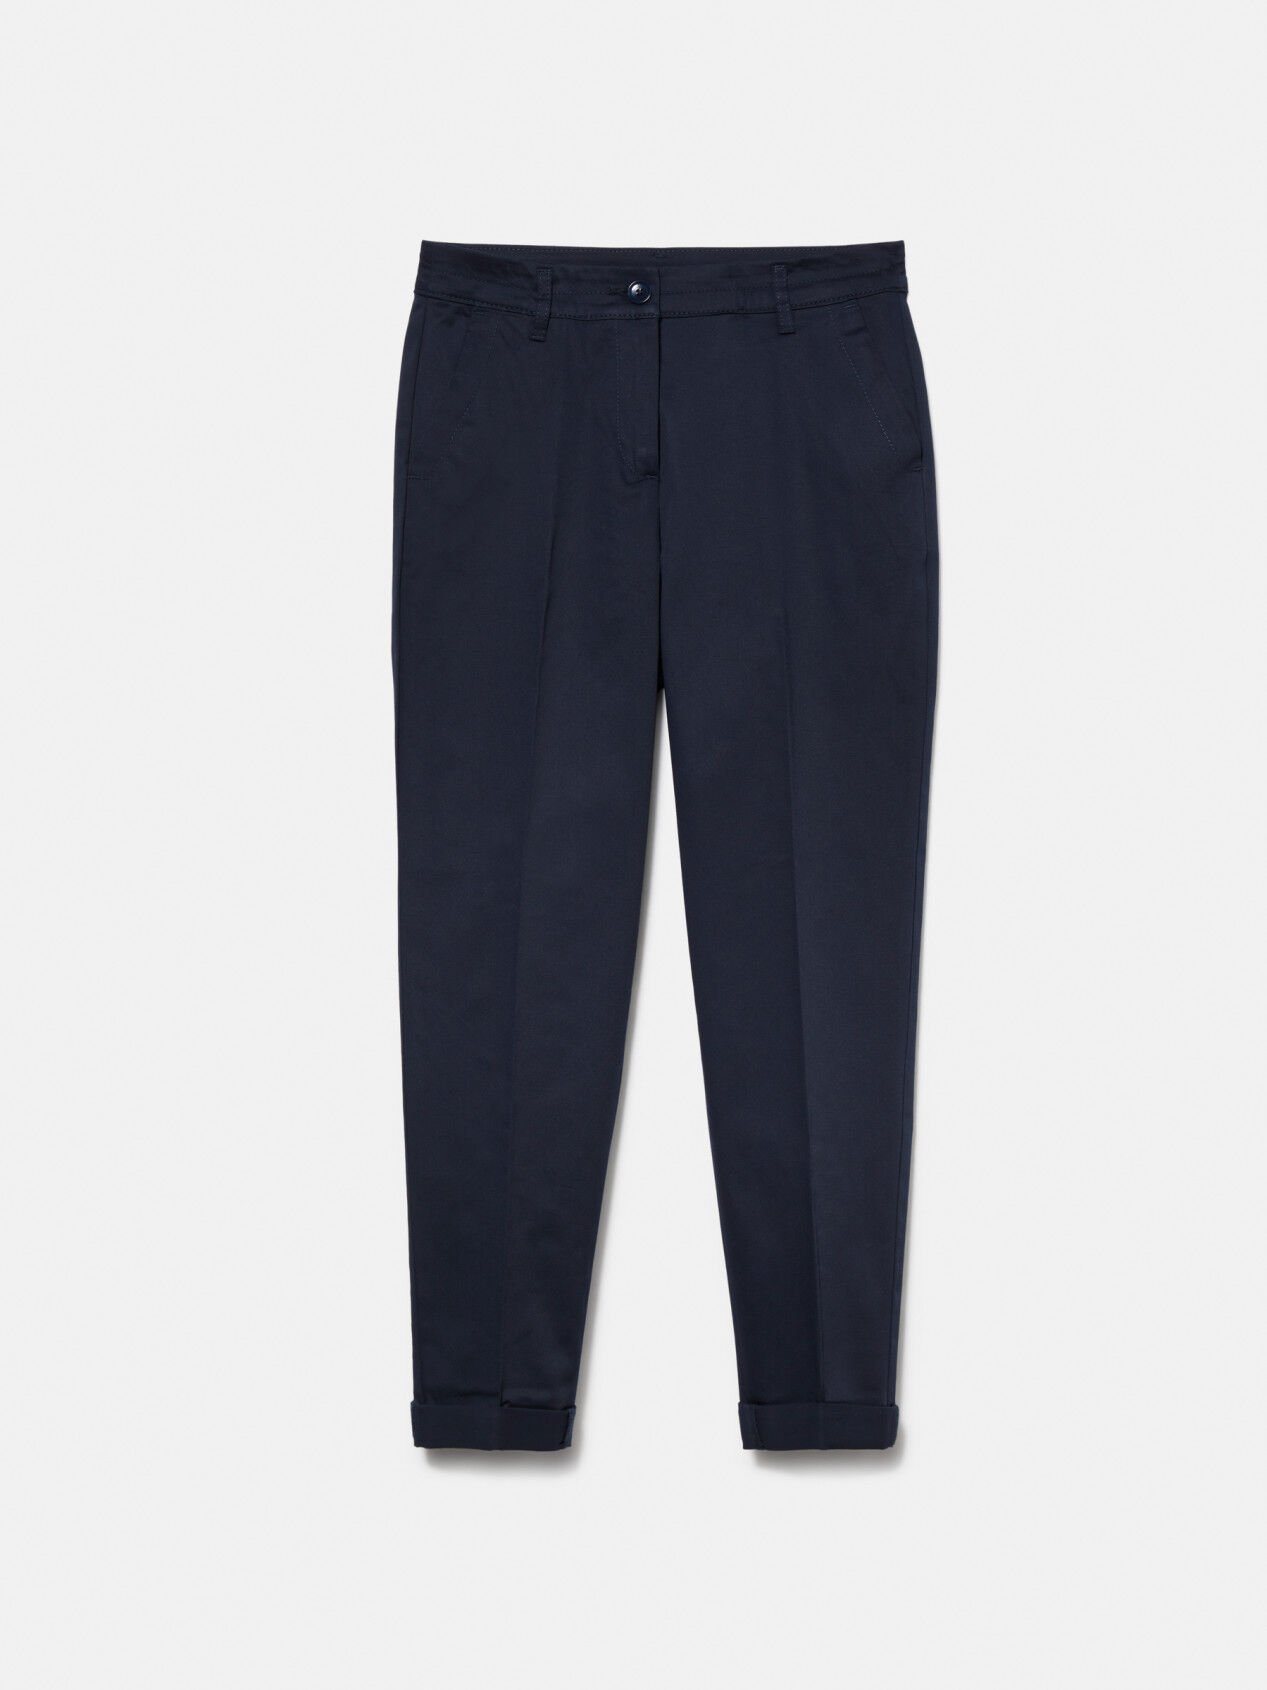 Navy blue cigarette trousers - BOUTIQNA